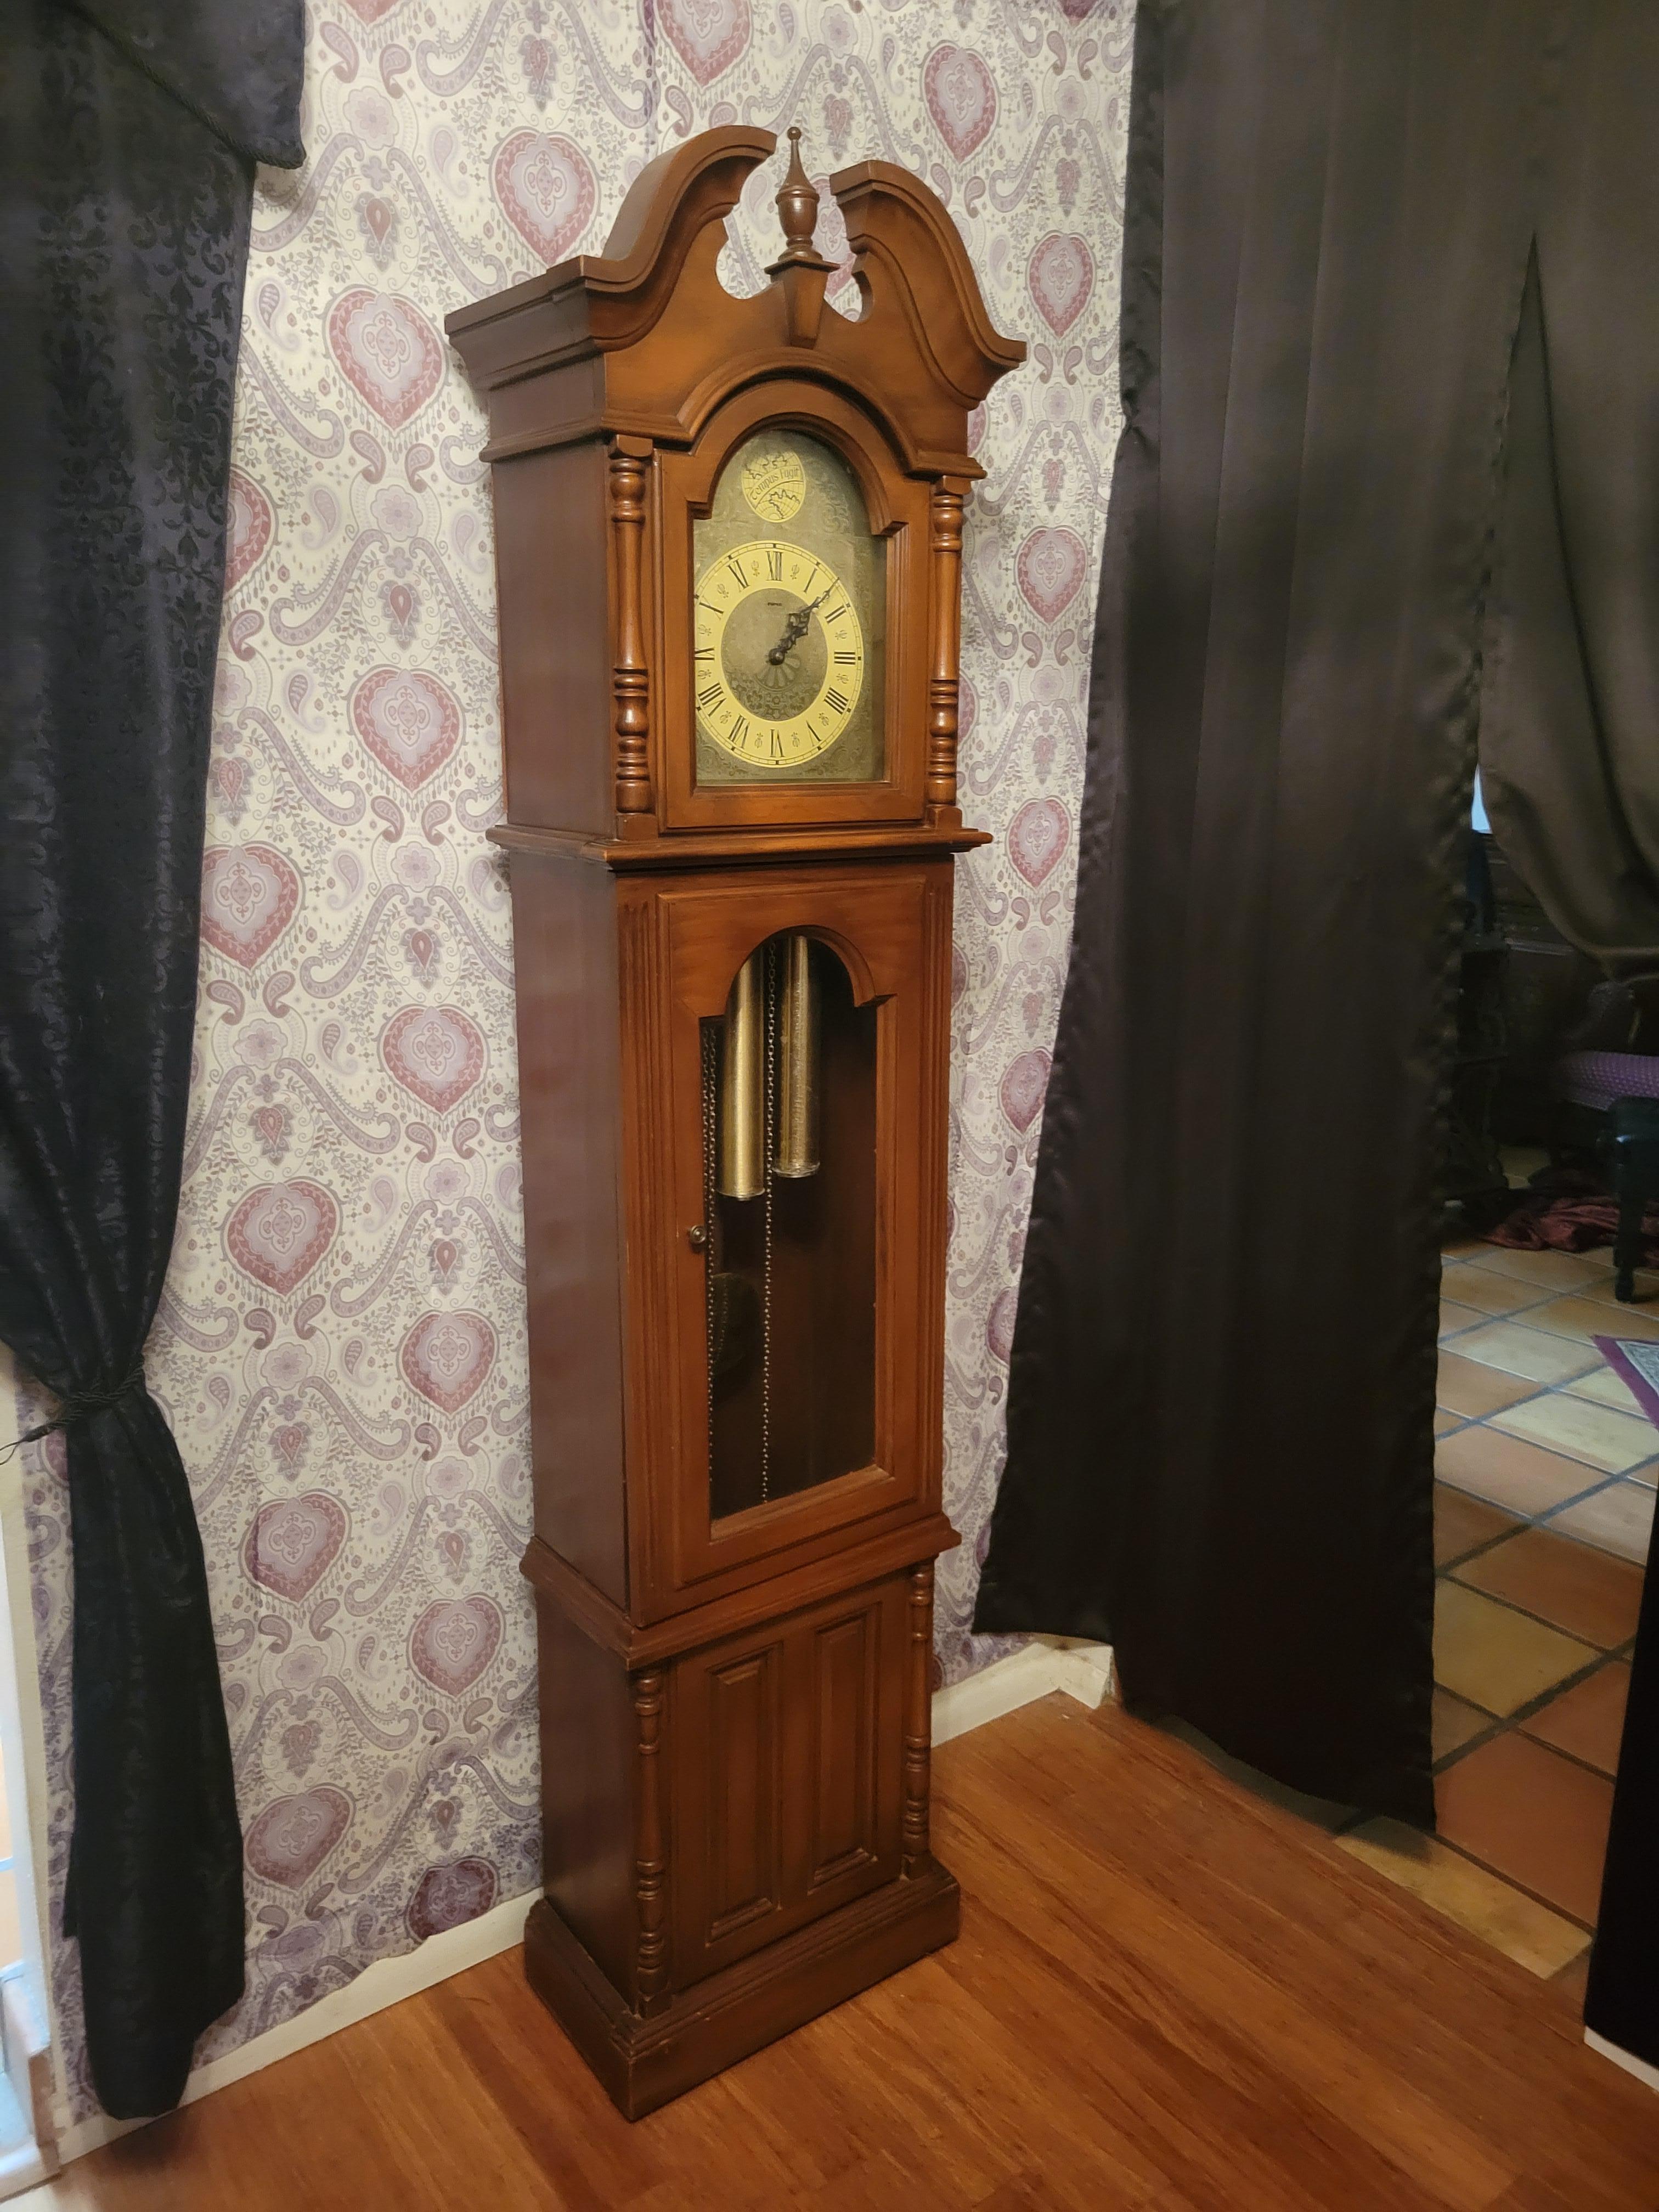 Vintage, 1976, weight-driven Piper grandfather clock. The clock has a West Germany Franz Hermle 451-053 85cm / 70.77 movement with a beautiful Westminster Chime. The chime goes on every 15 minutes and plays 4, 8, 12, 16 notes respectively..
The case